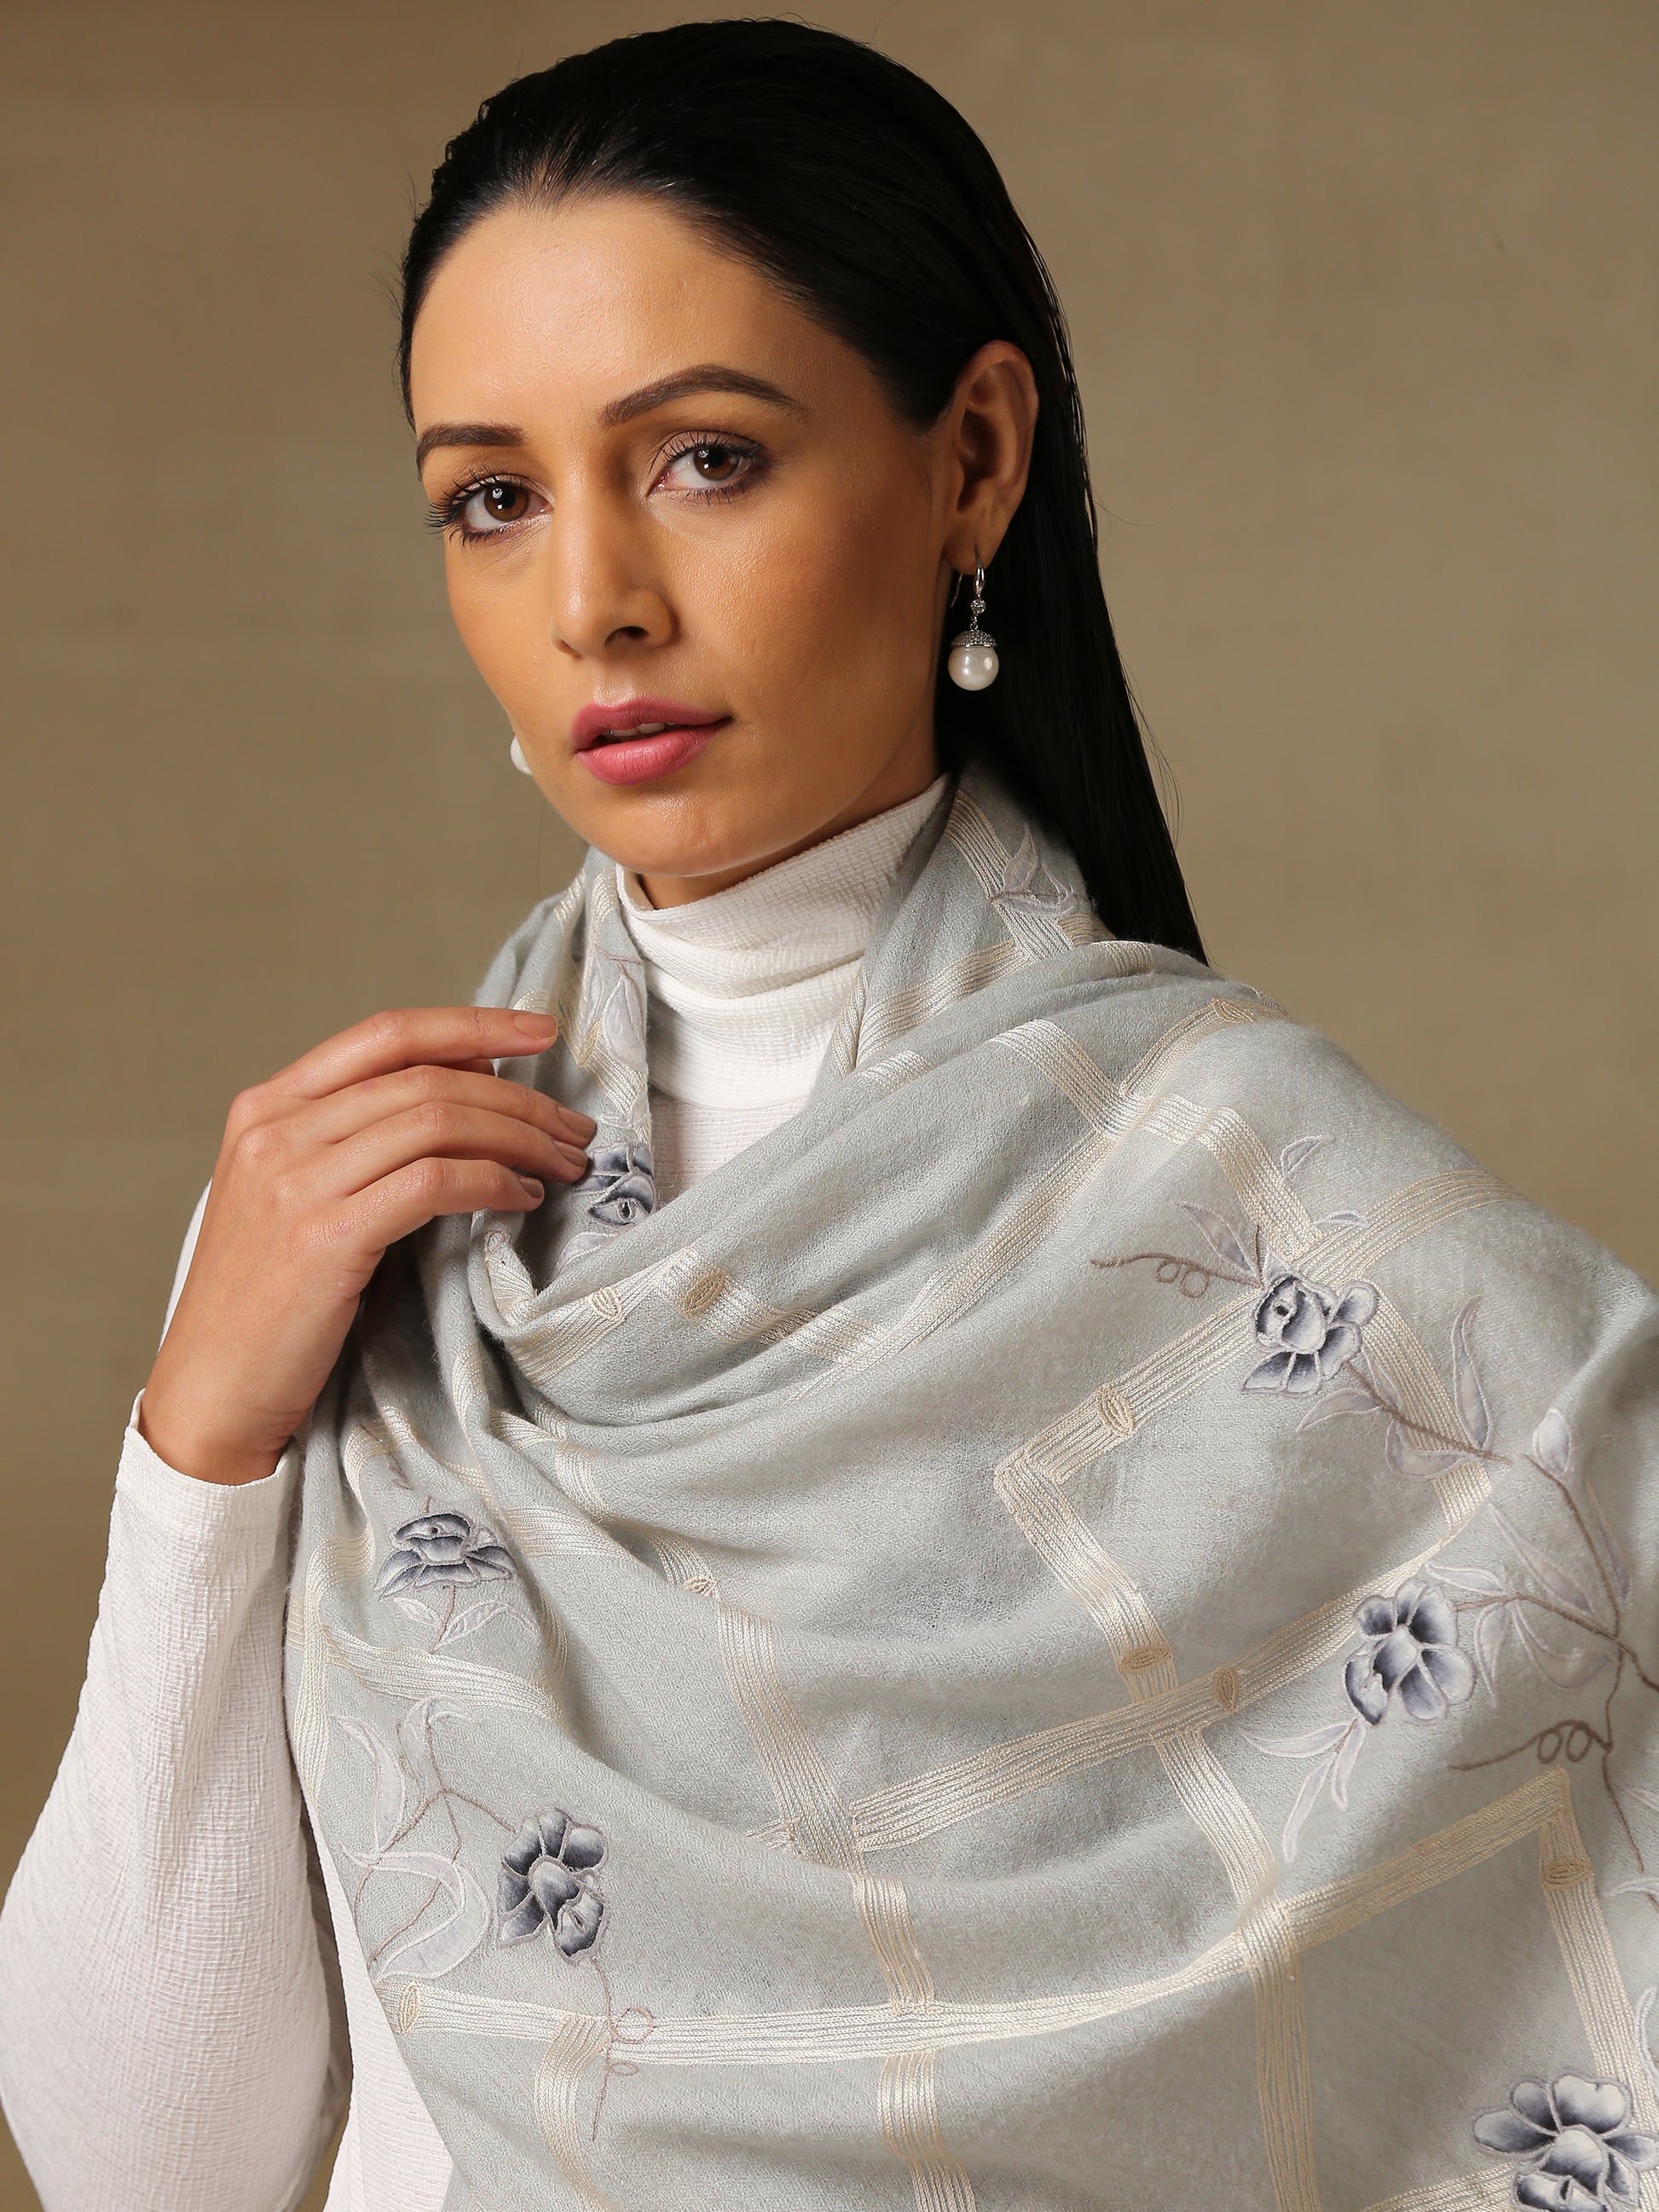 Model is wearing the Daisy pashmina stole in Ice blue from Shaza, featuring threadwork of interwoven lines and applique of daisy figures on handloomed pashmina. 